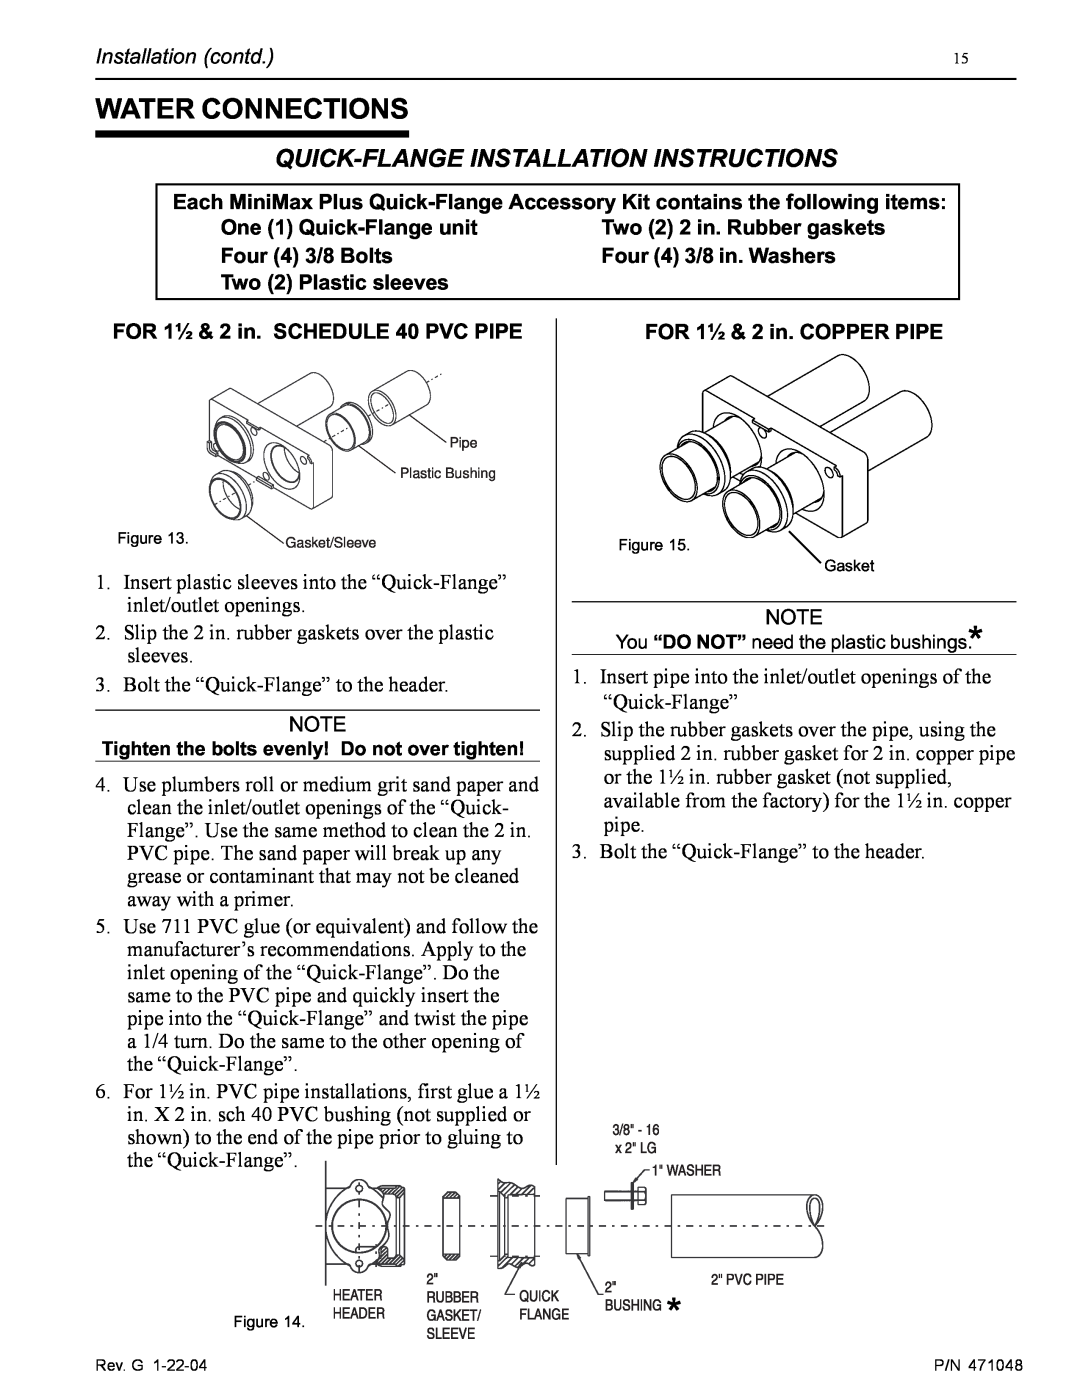 Pentair 100 Water Connections, Quick-Flange Installation Instructions, Tighten the bolts evenly! Do not over tighten 